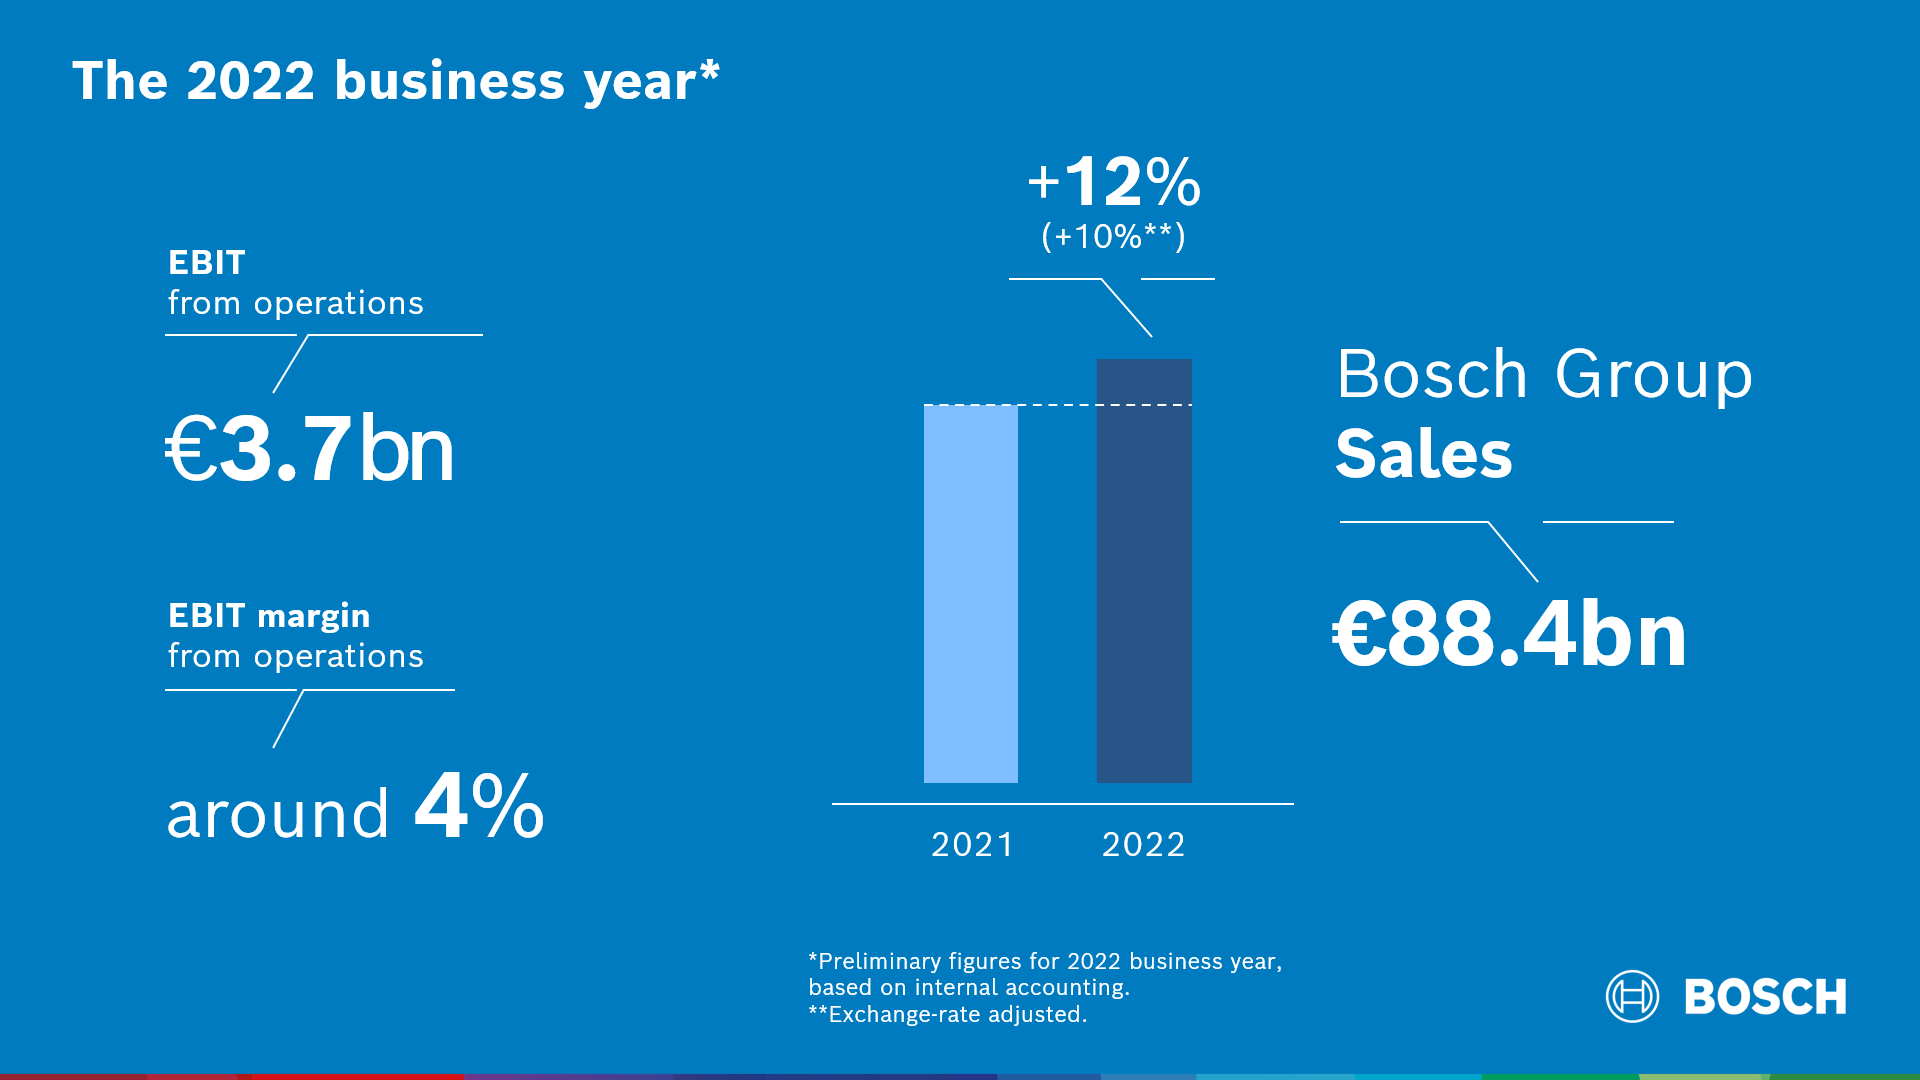 The 2022 business year: Bosch achieves its targets in a difficult